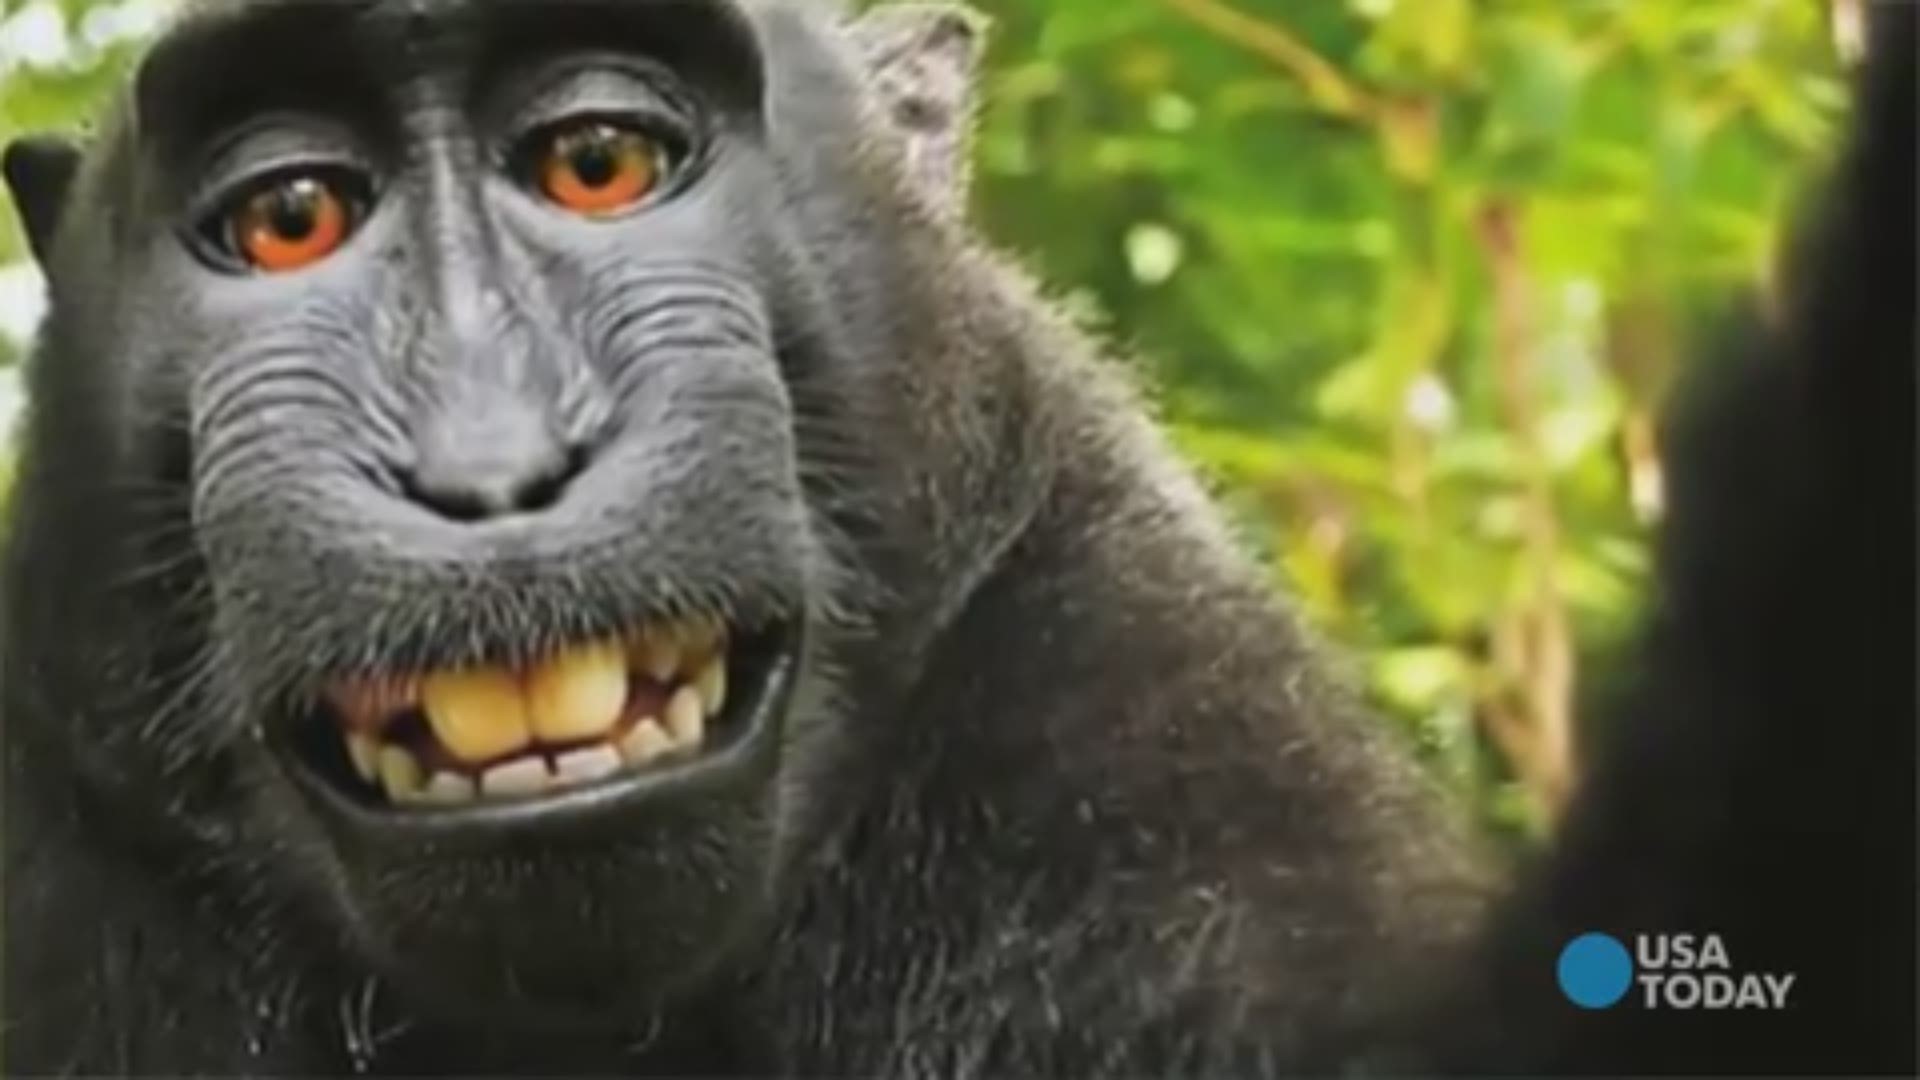 Monkey see, monkey do. But when a monkey takes a selfie, who owns the copyright? (USA TODAY 2016)